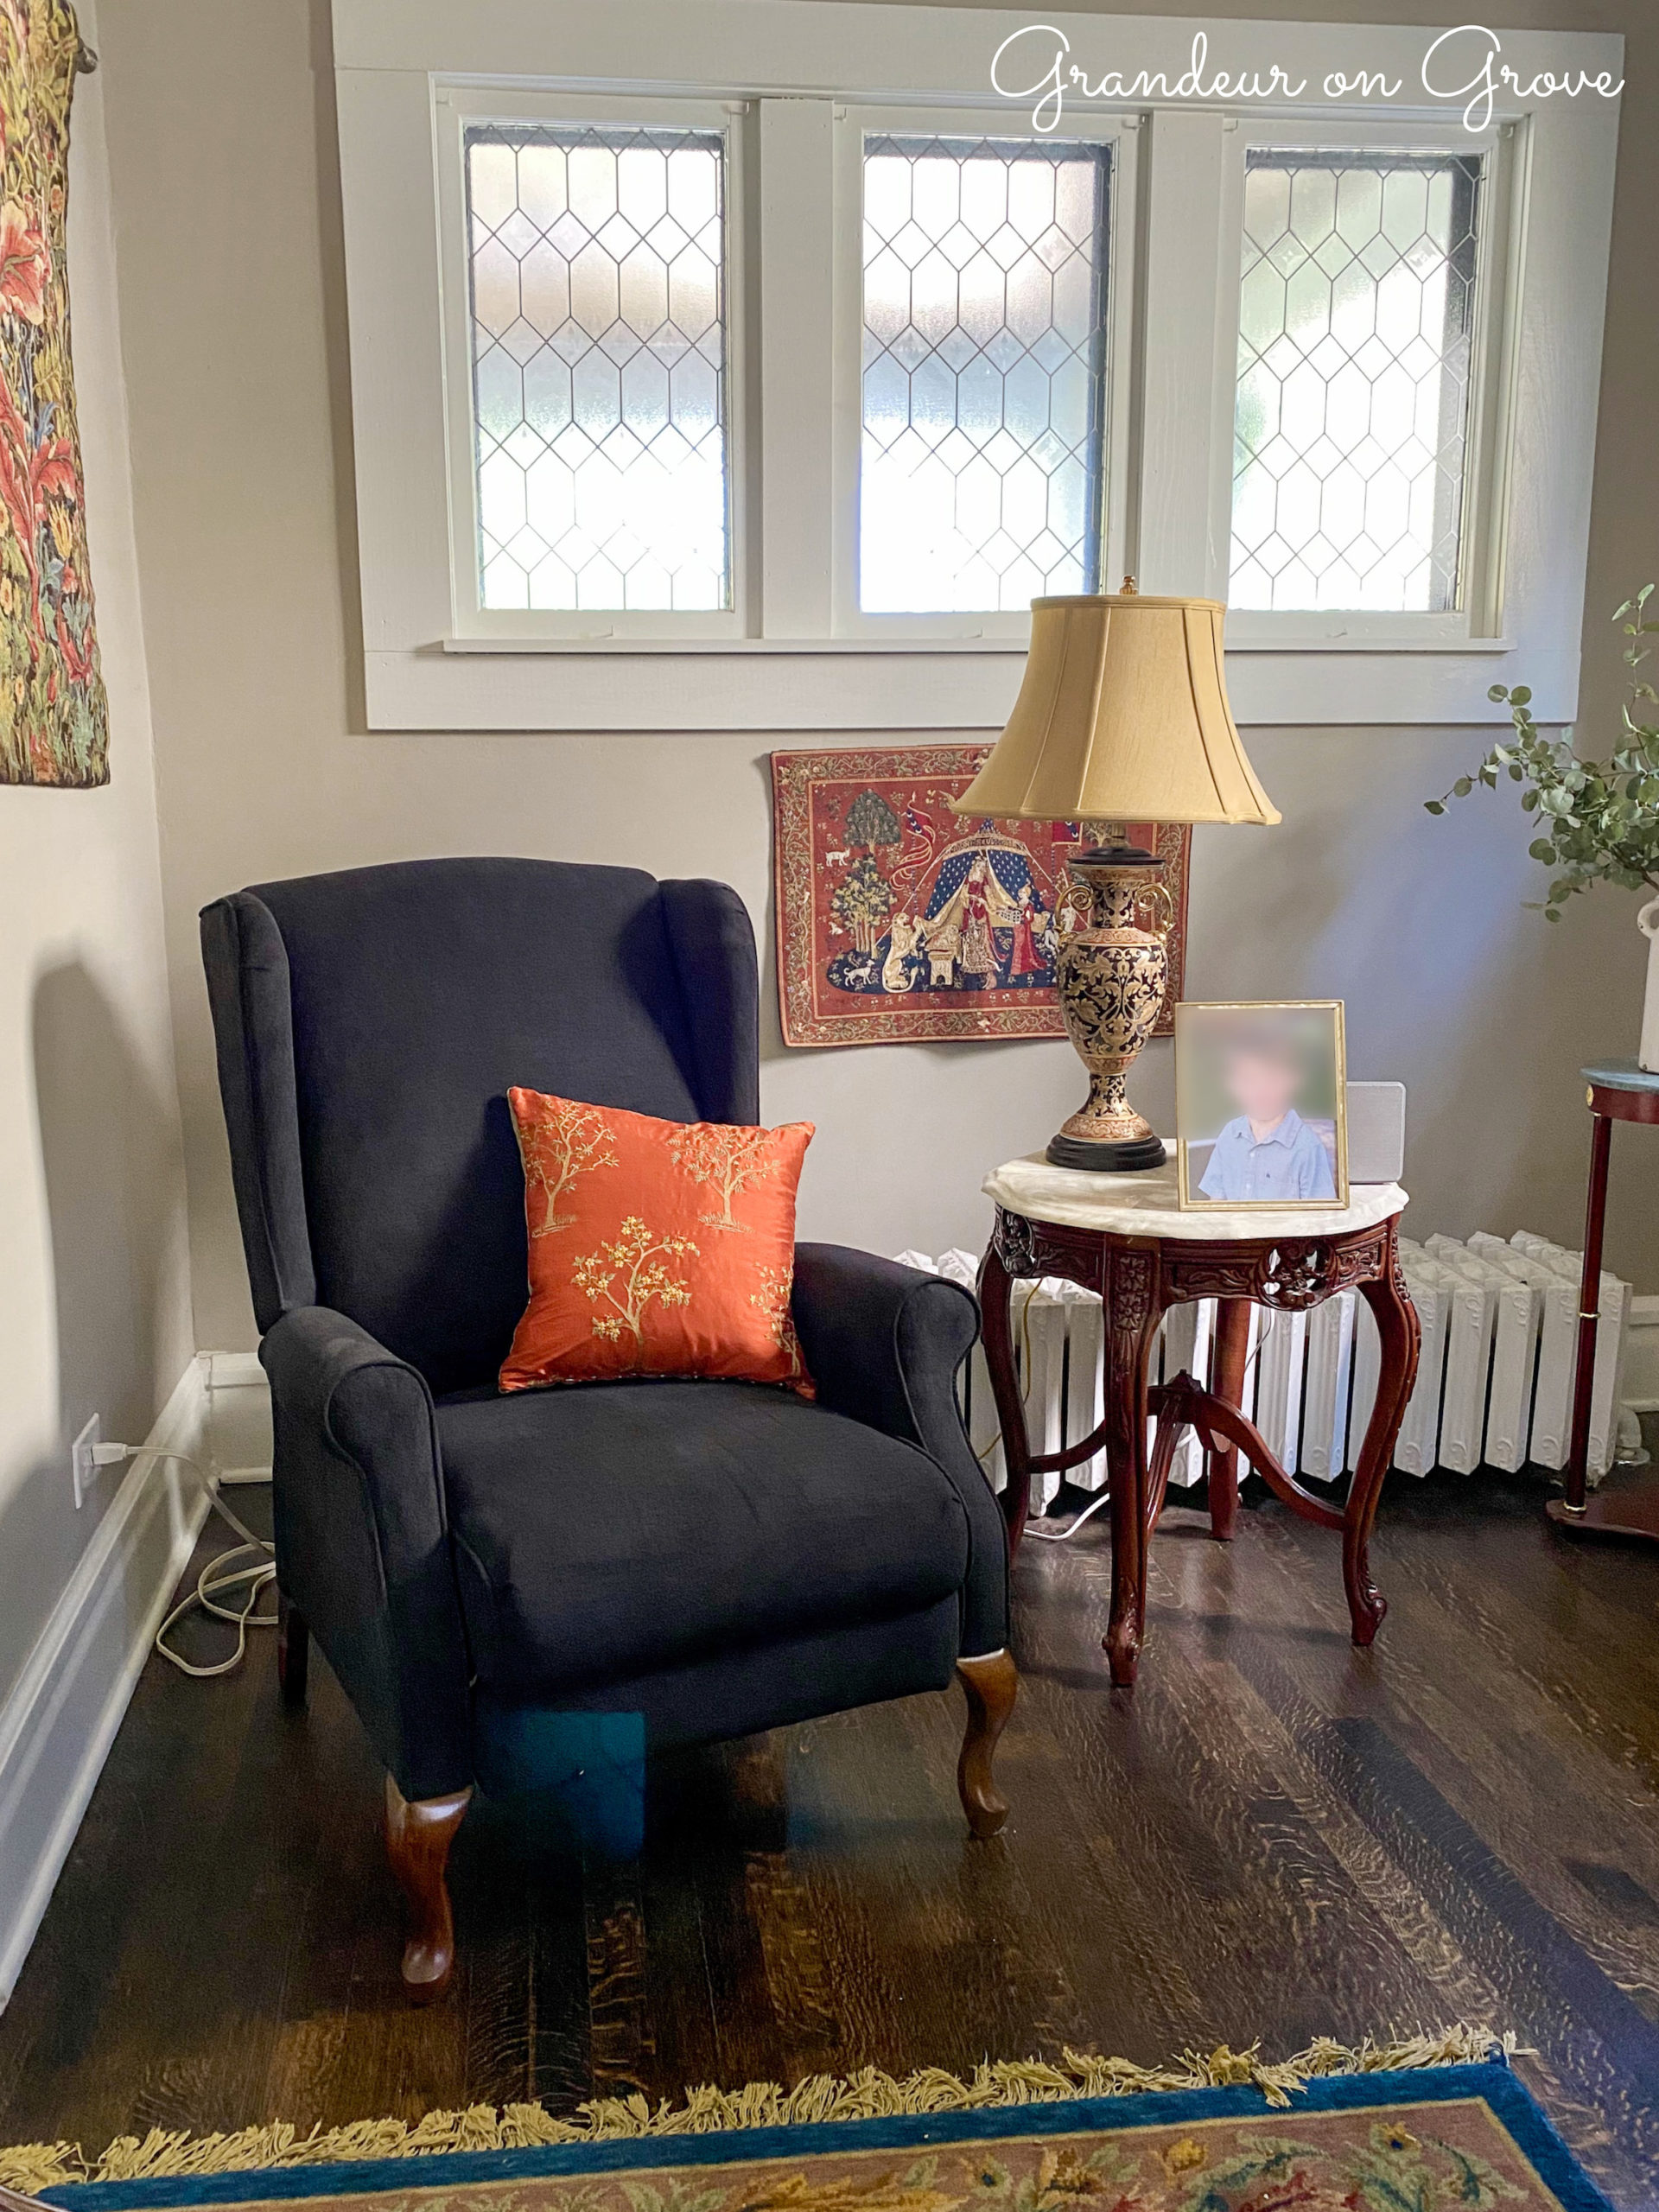 A living room with chair, pillow, lamp and tapestries